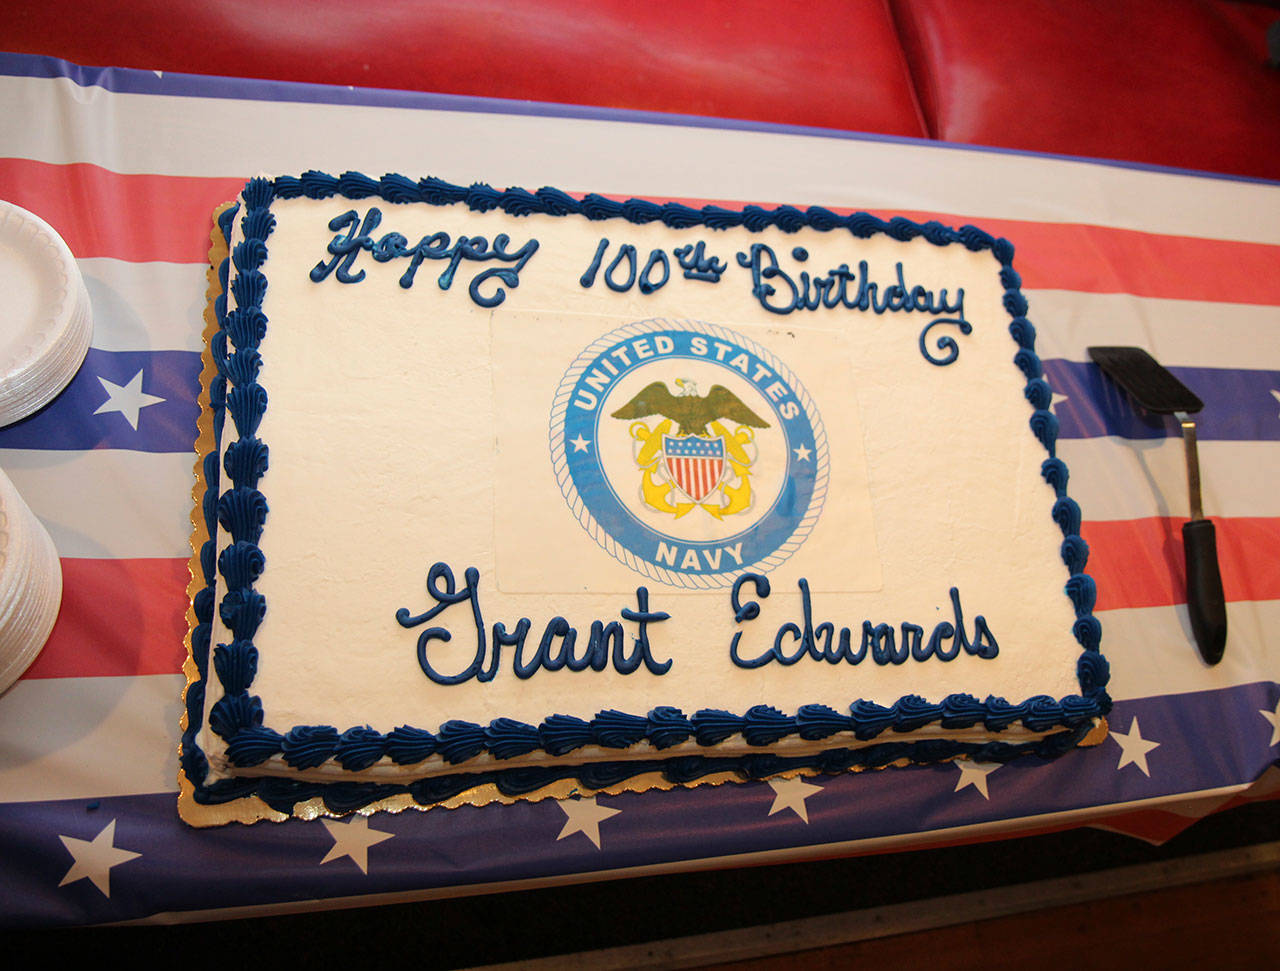 (Courtesy photo) Members of the Montesano Veterans of Foreign Wars post celebrated Grant Edwards’ 100th birthday with this cake on Saturday.